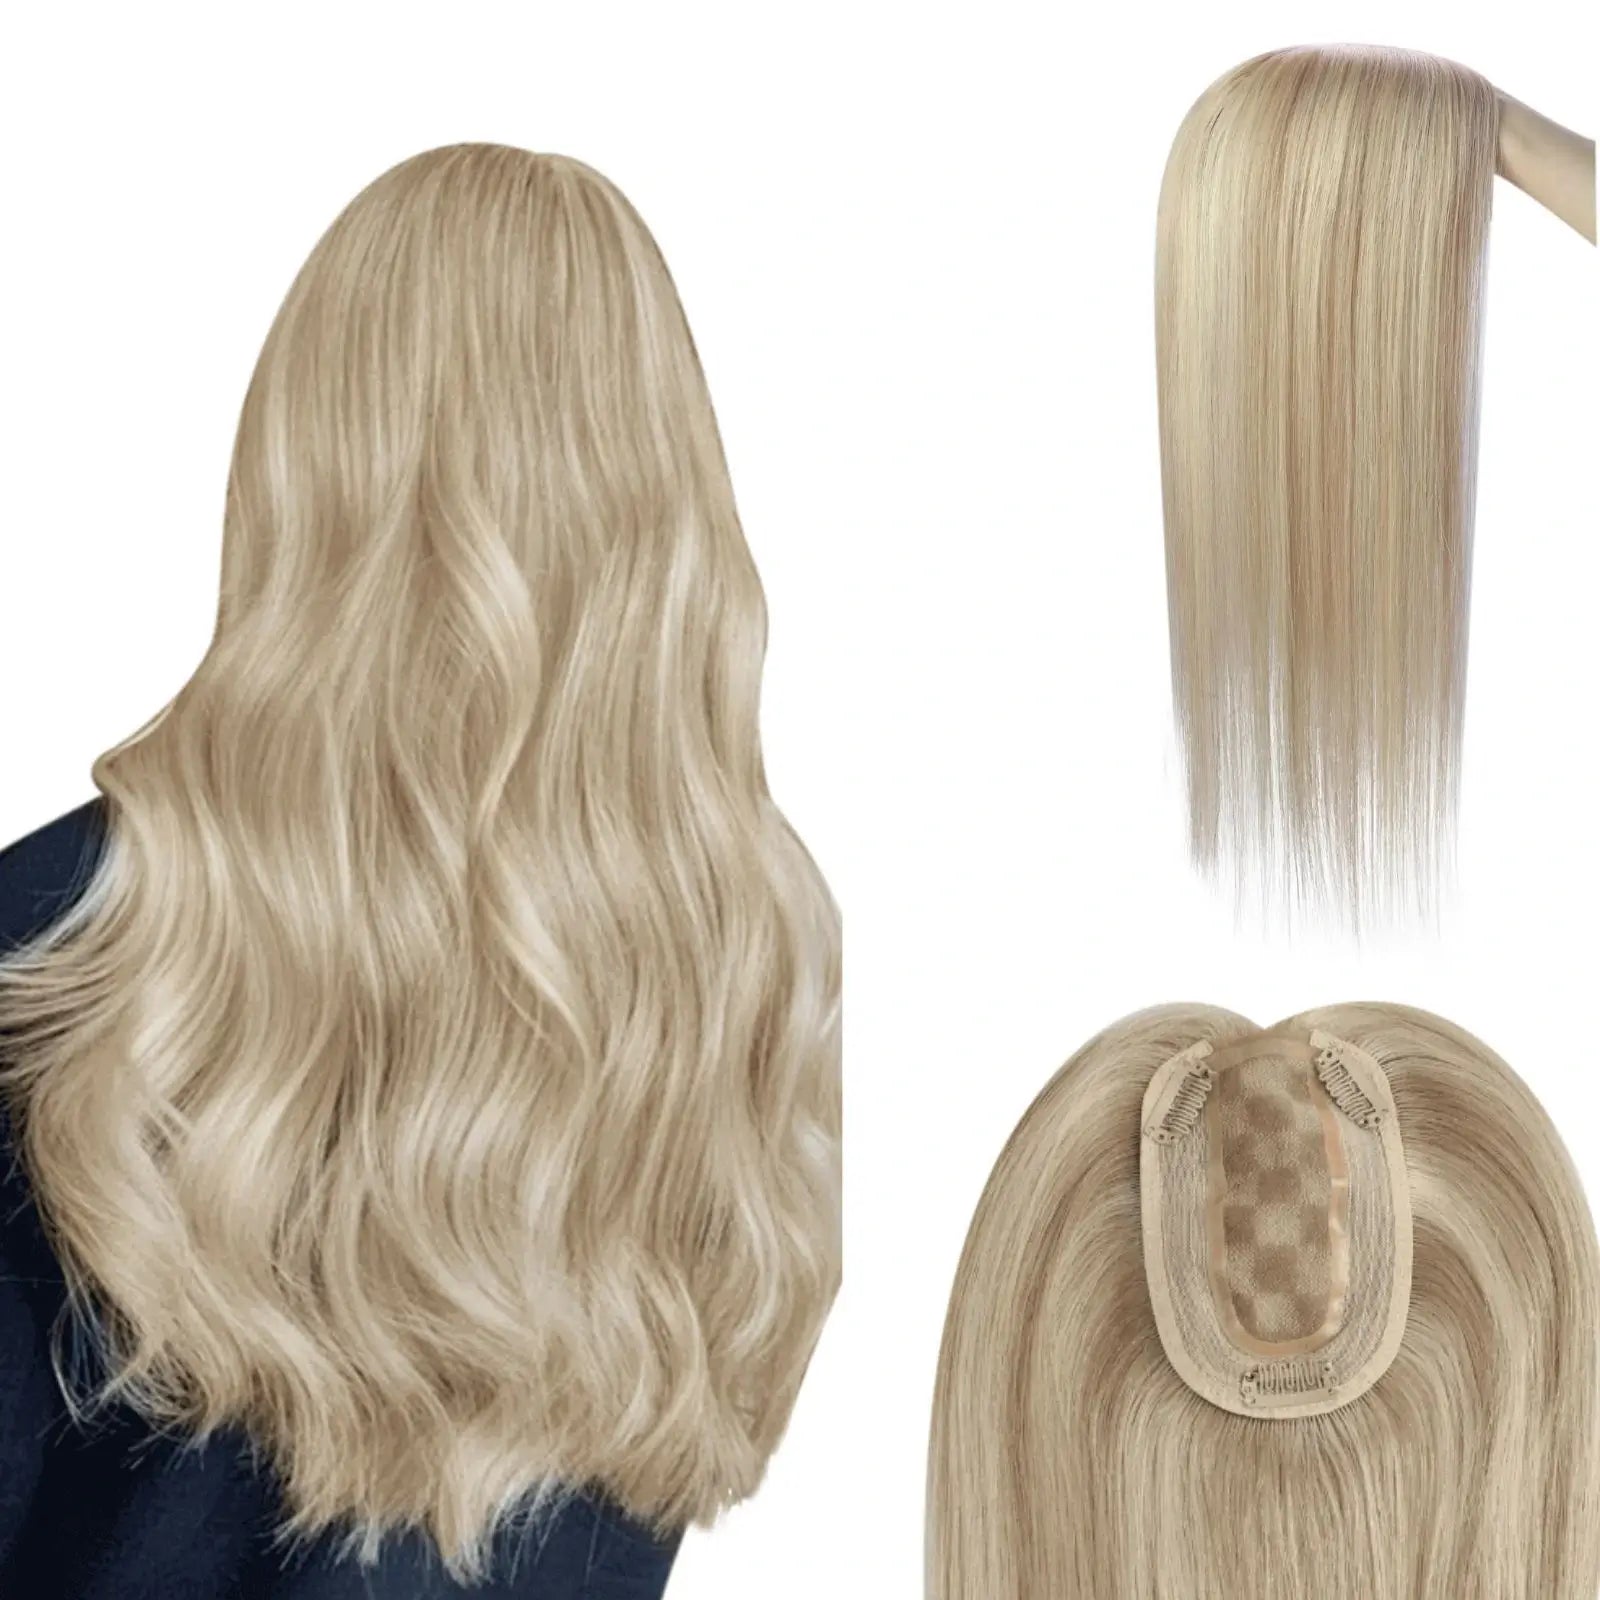 Medium Base Virgin Hair Toppers Without Bangs Hairpieces Fo rThinning Hair